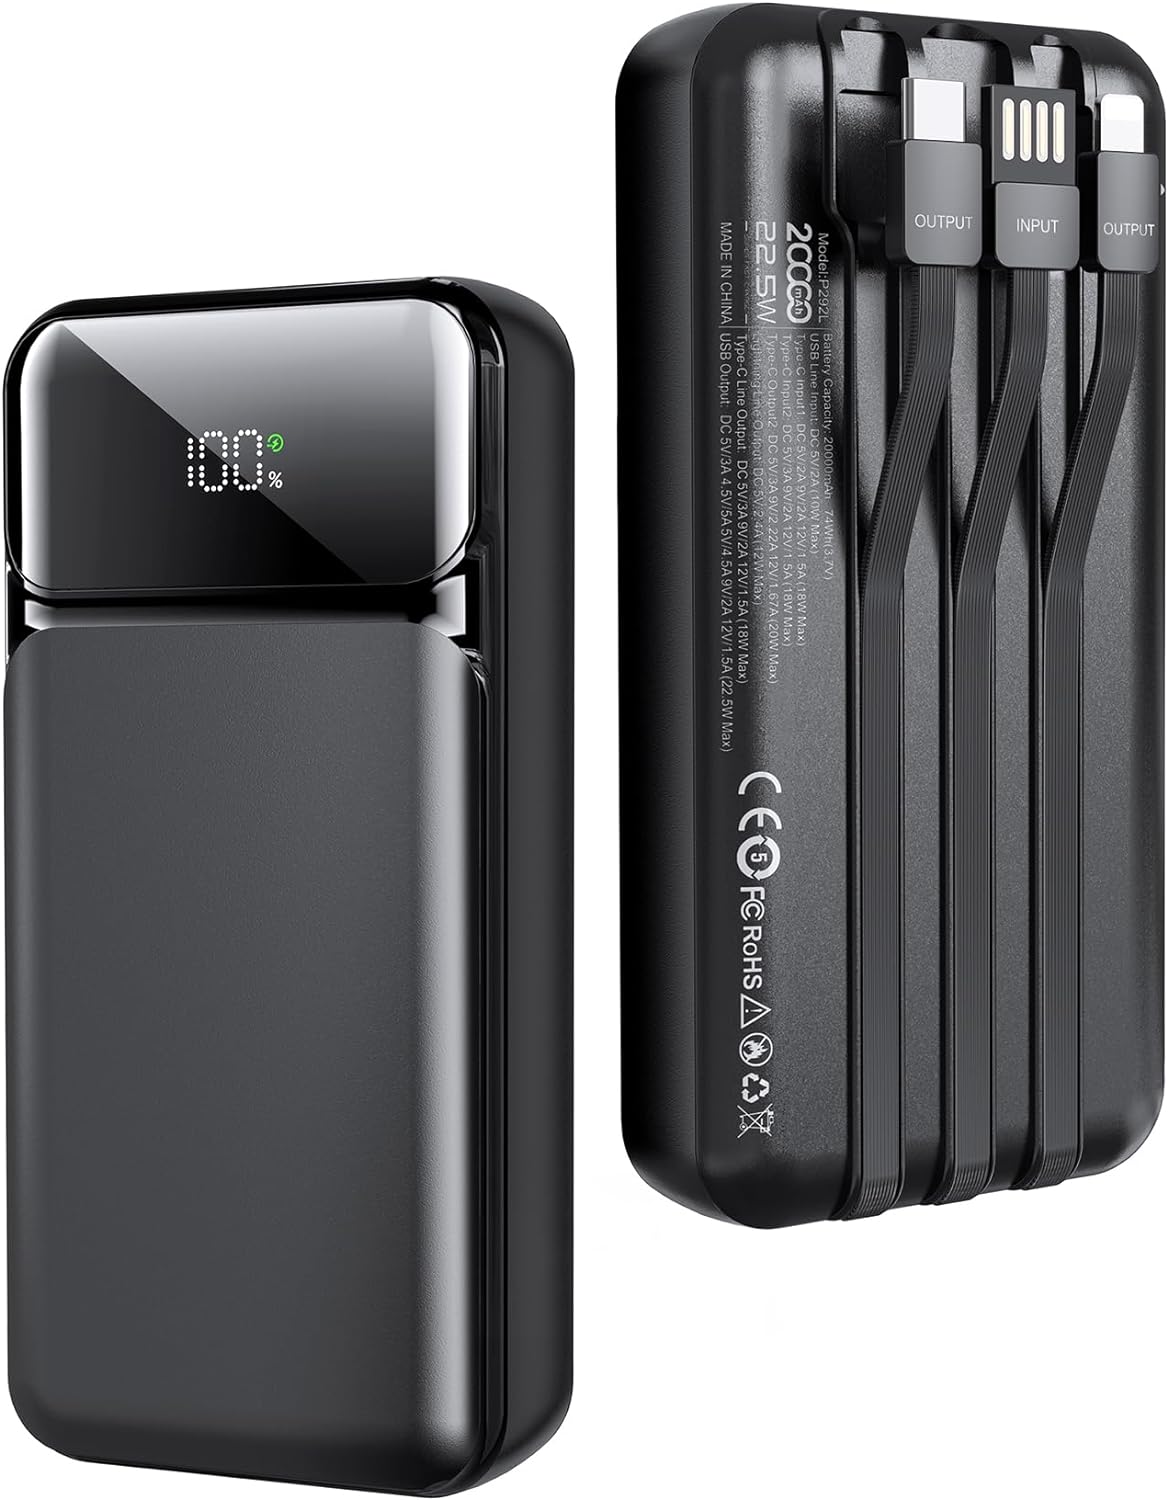 Guowo Portable Charger Power Bank with B…